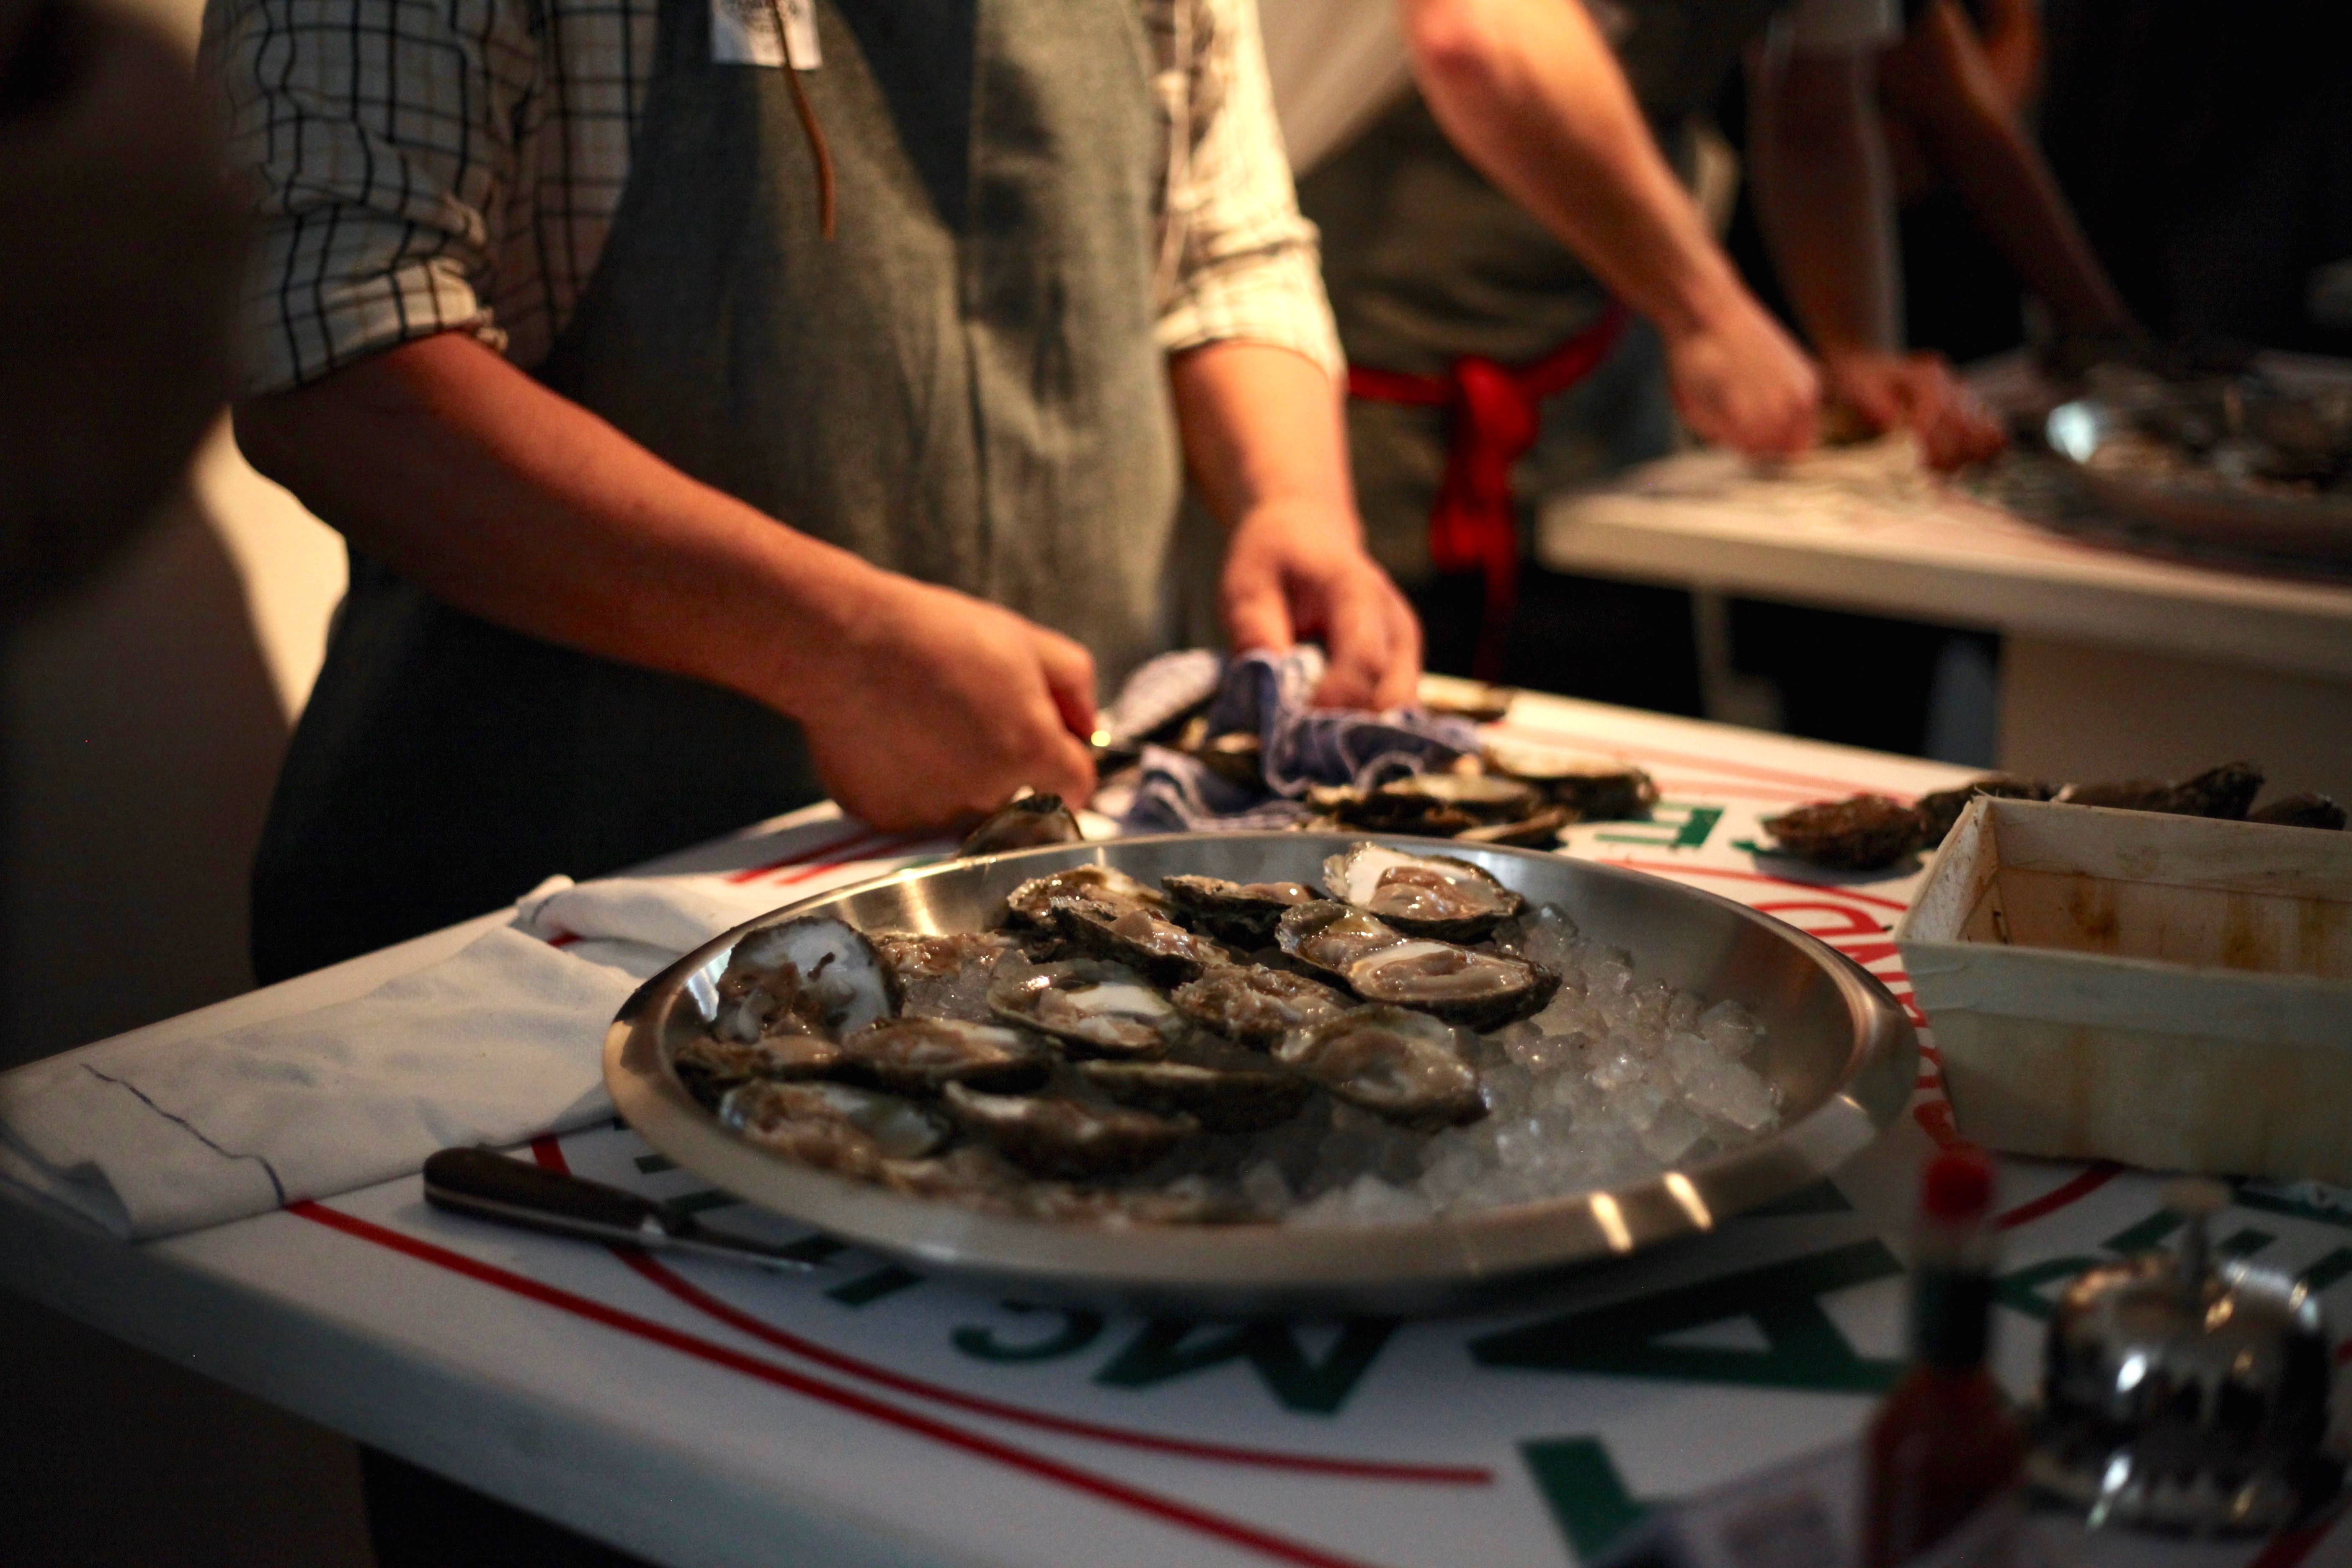 Antonio at his shucking station, halfway through shucking his 30 oysters and displaying them in a platter of ice